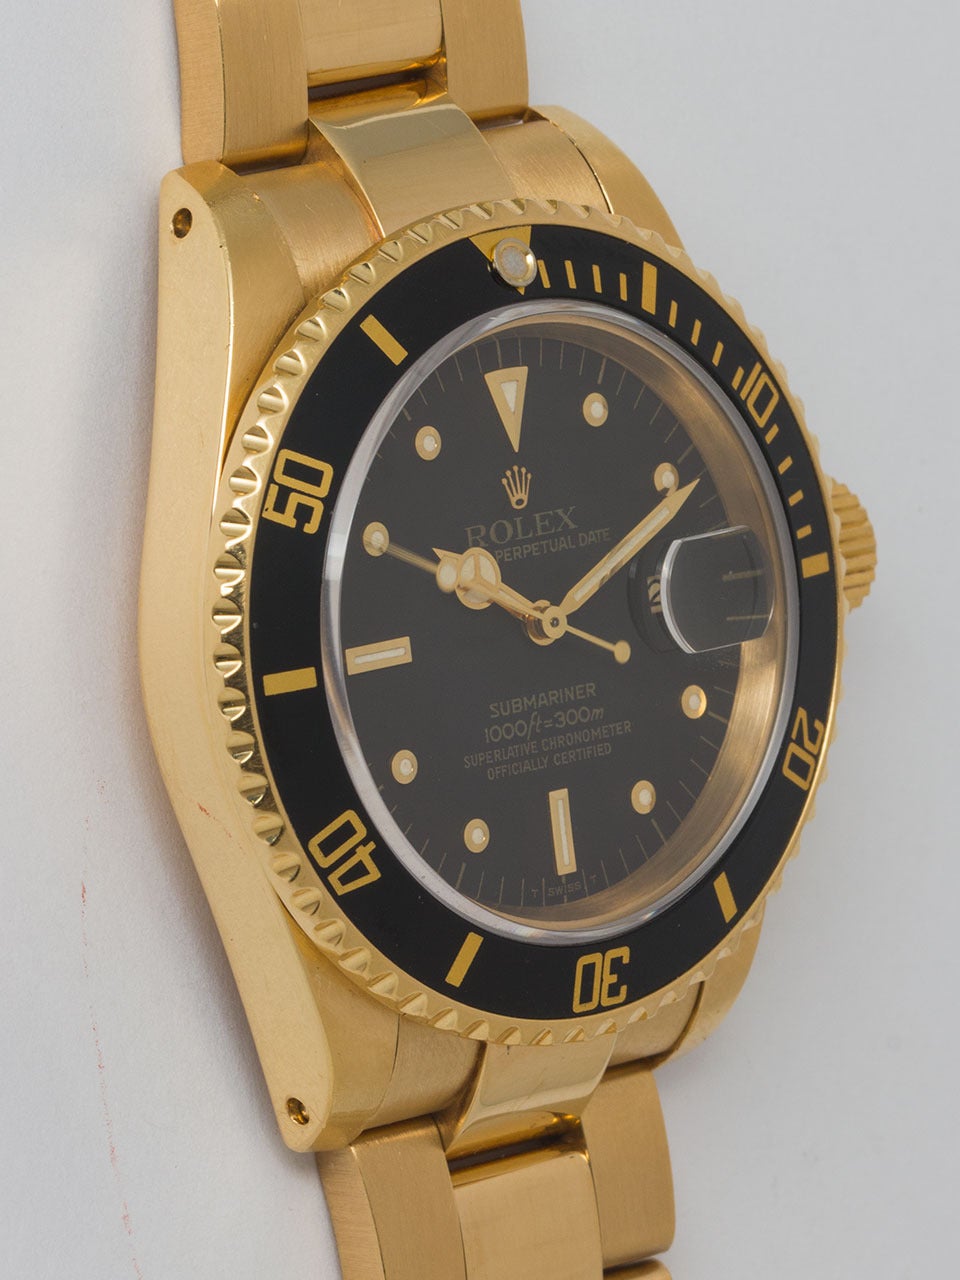 Rolex 18K Yellow Gold Submariner Wristwatch ref 16808, serial #8 million, circa 1983. Exceptional condition example of this classic early sapphire crystal model, case has heavy beefy lugs and unidirectional elapsed time bezel with black insert. With